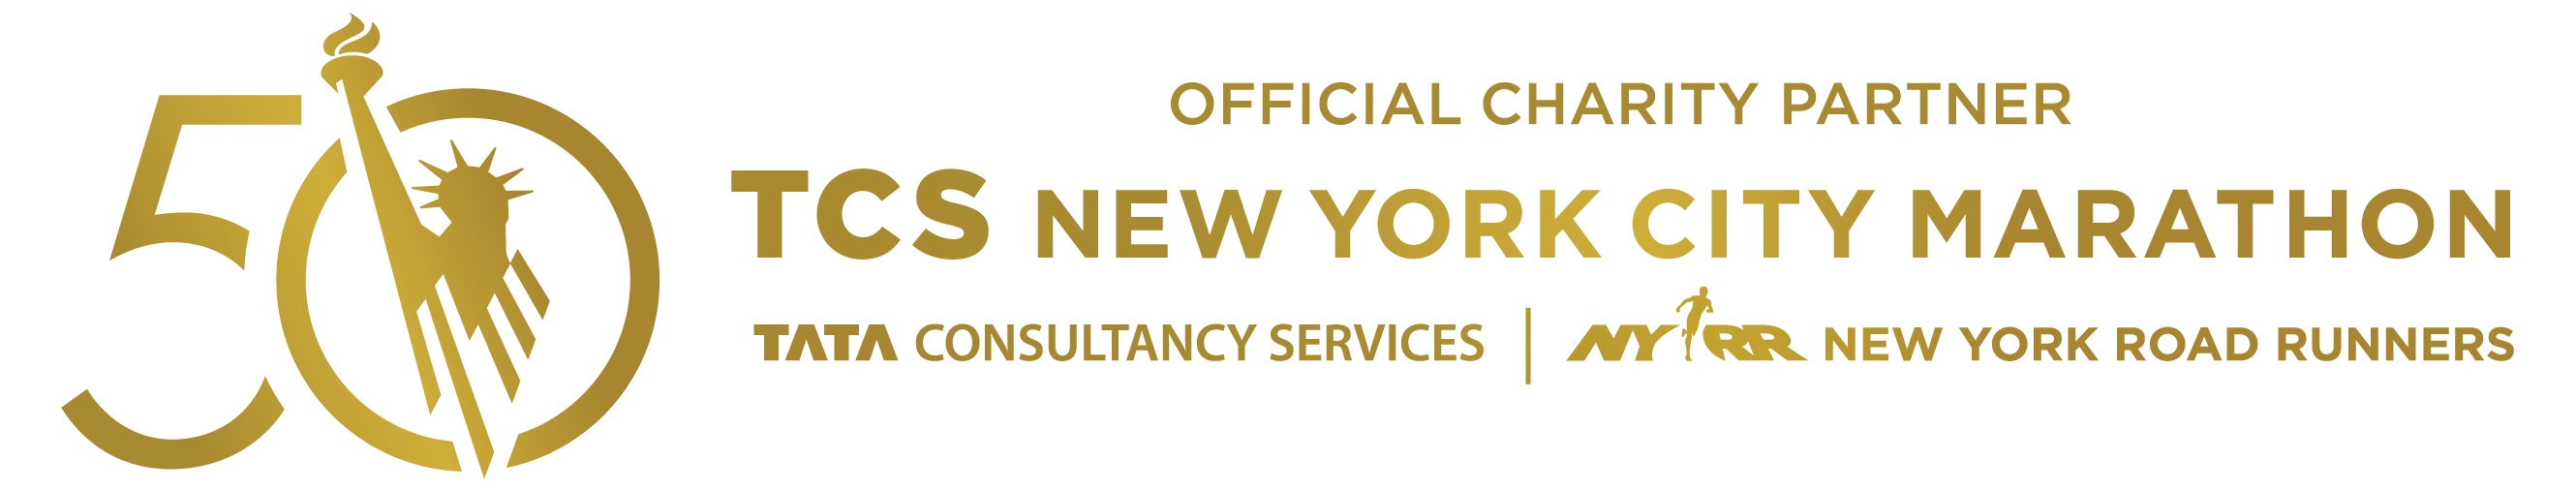 NYCM20 50 charity designation logo RGB full color gold primary horizontal